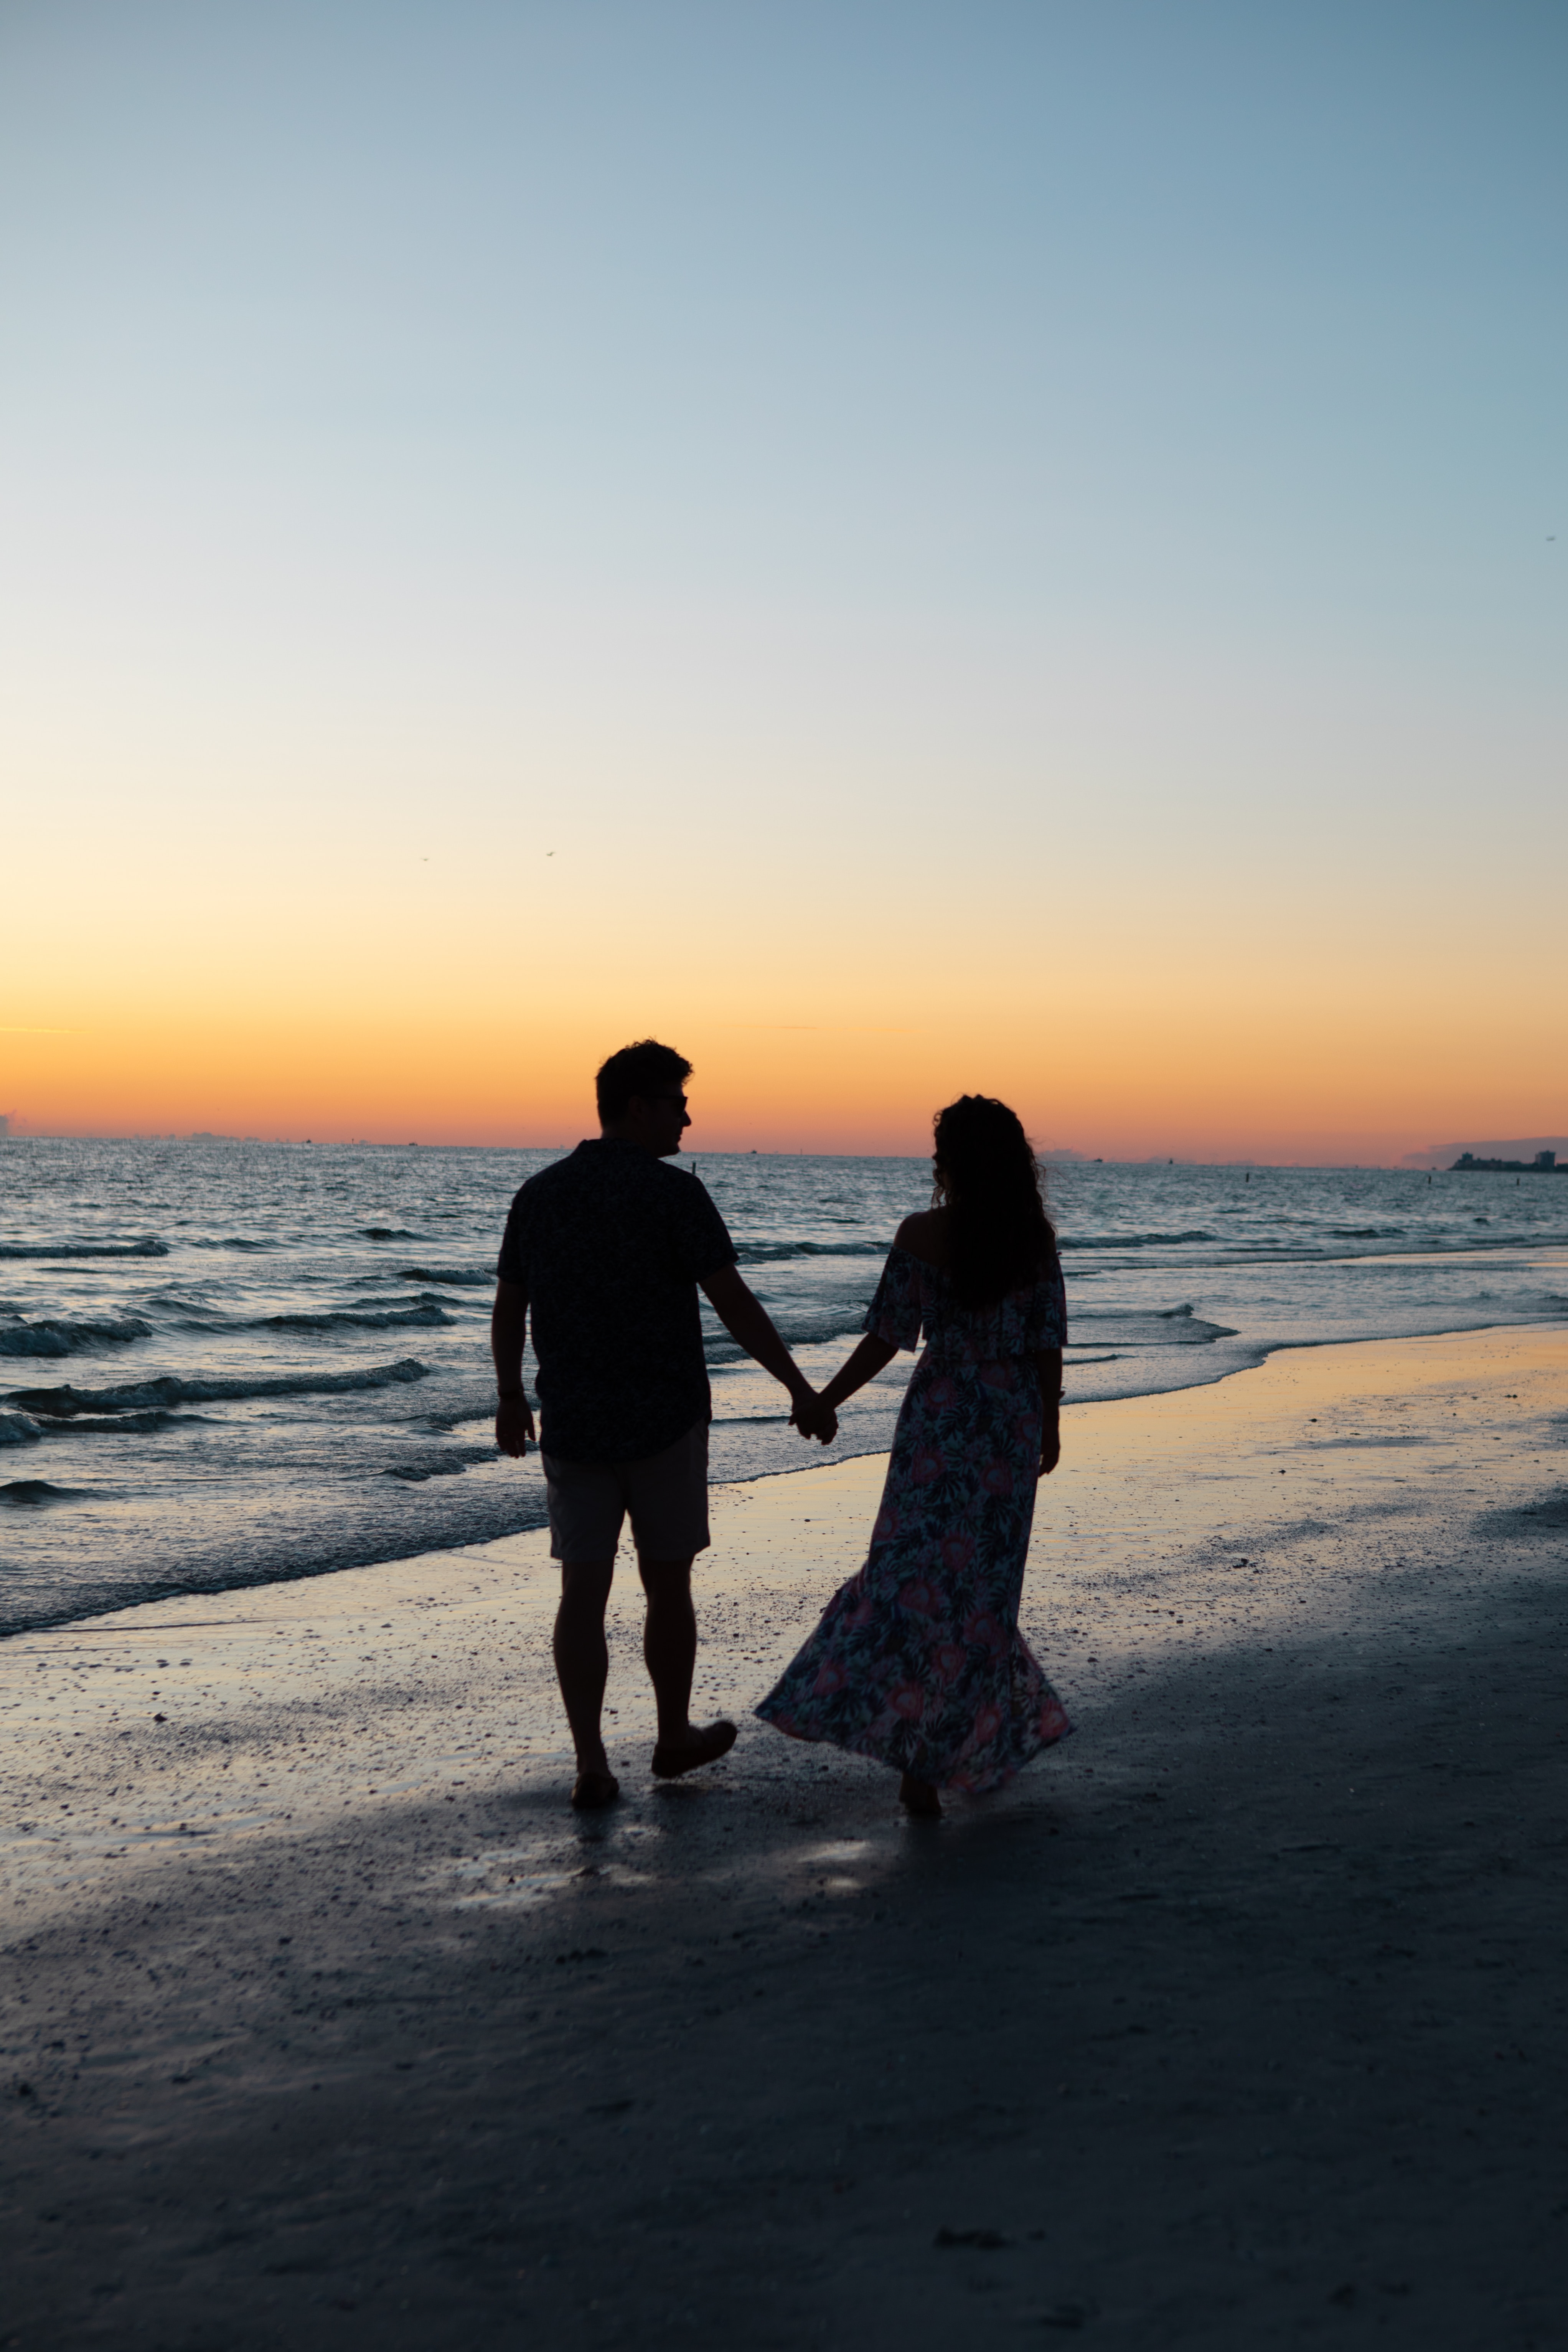 Couple holding hands on the beach at sunset | Source: Unsplash